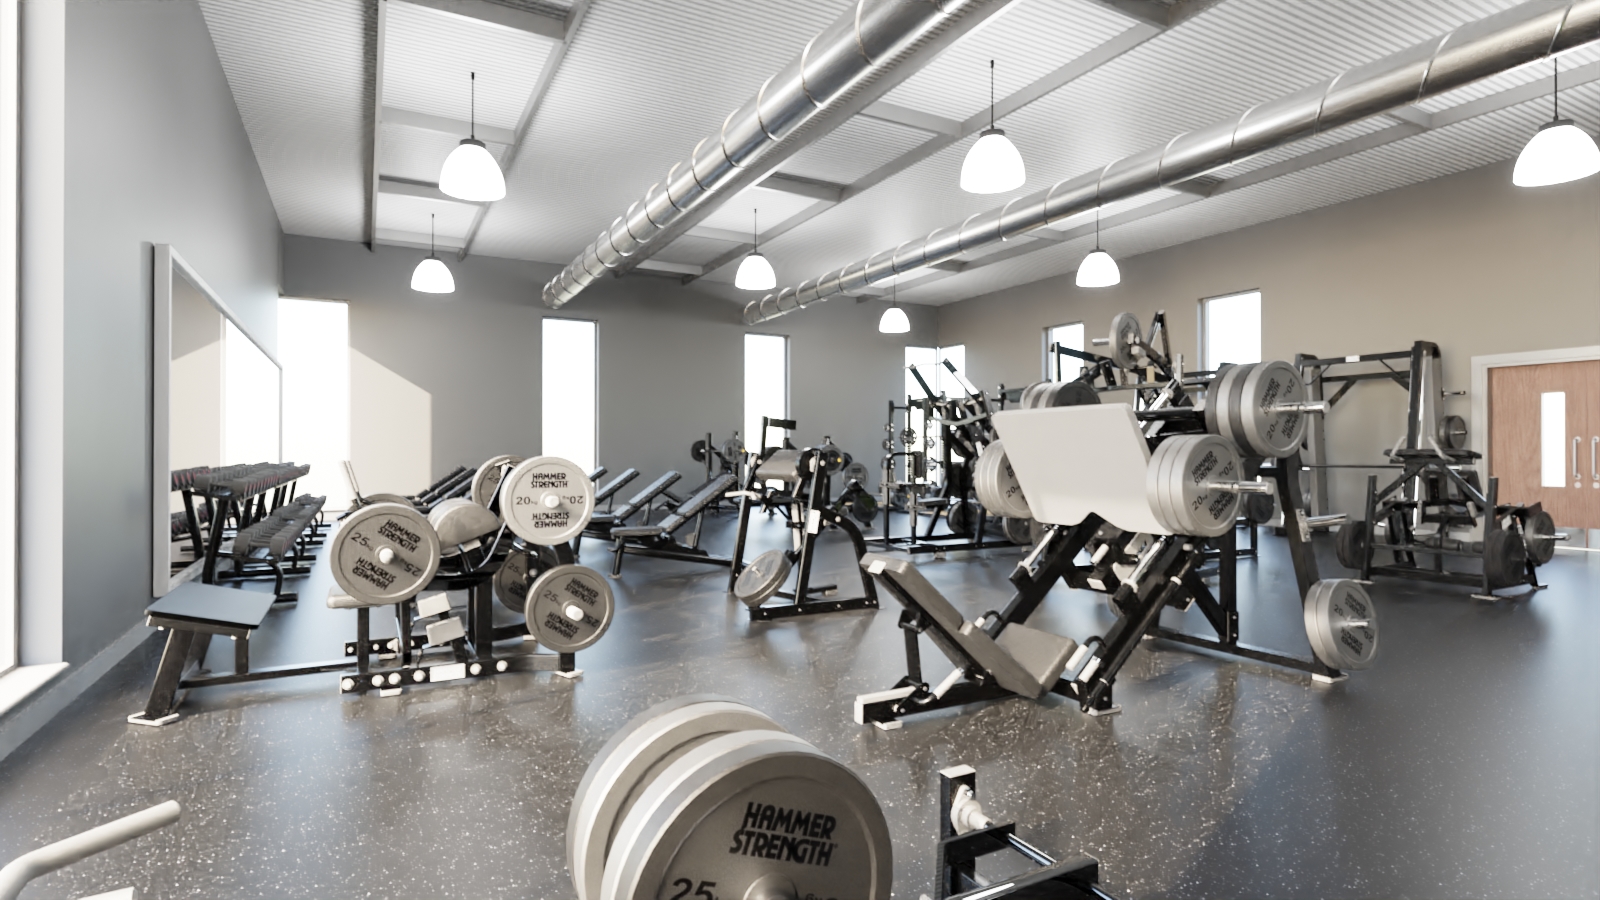 Artist impression of a gym at Ferry leisure centre